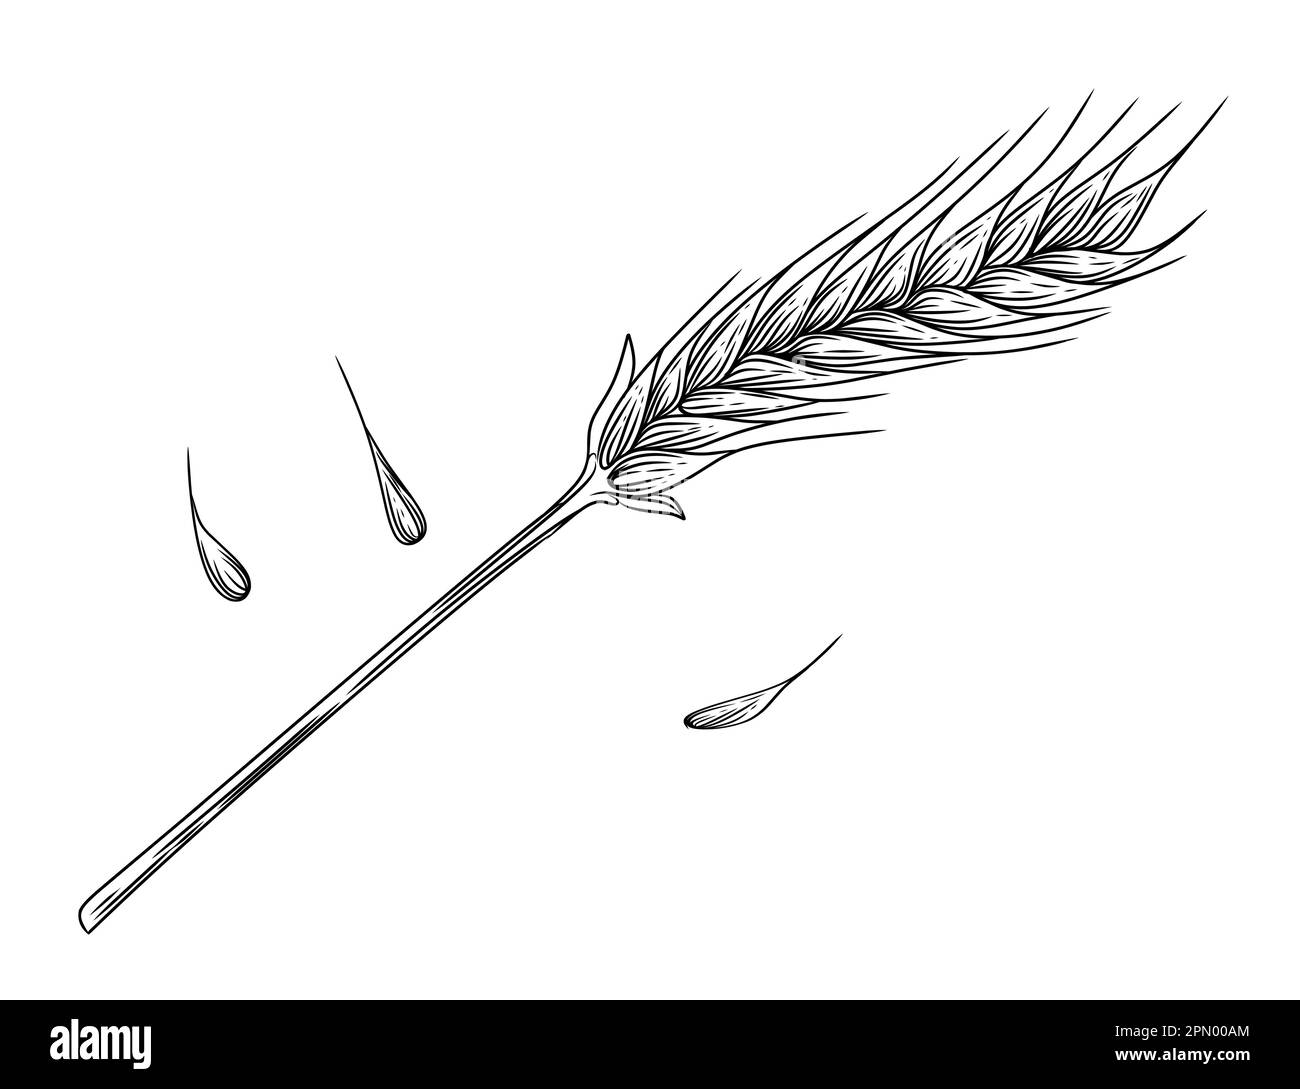 Outline sketch of wheat spikelets with ears grain and stem vector illustration on white background Stock Vector